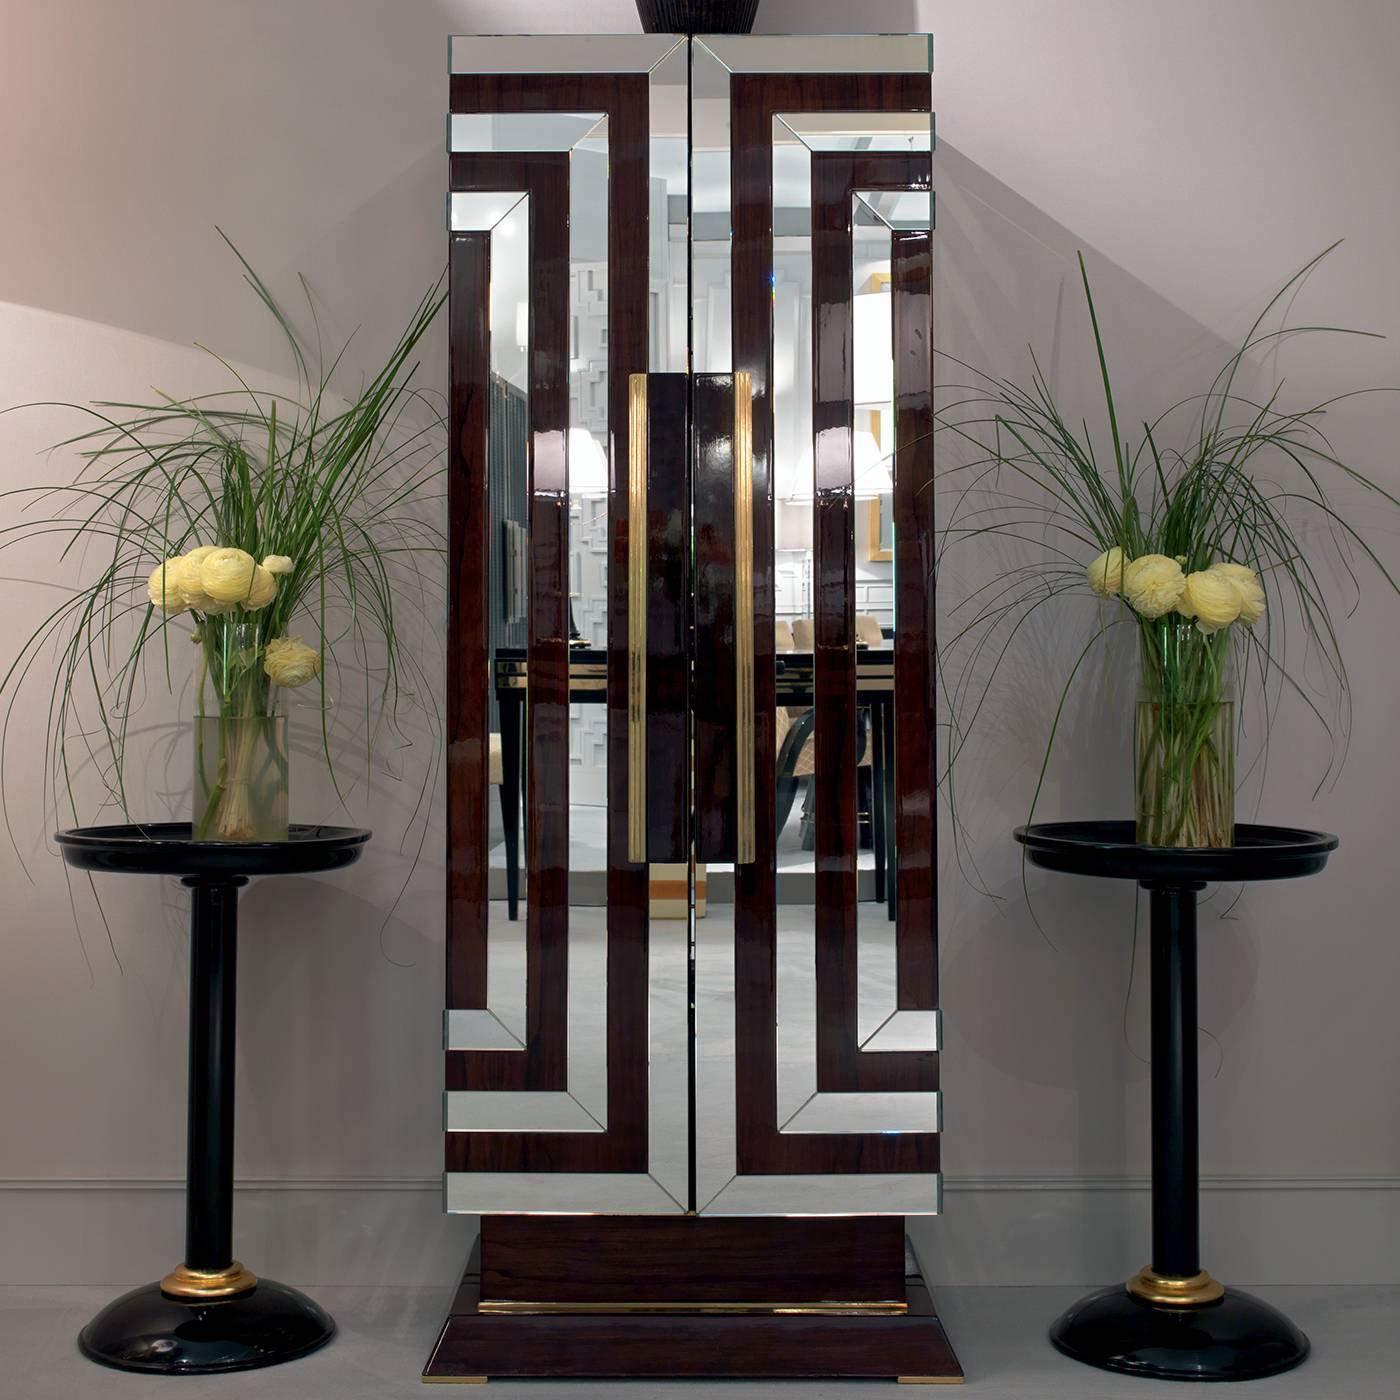 This exquisite bar cabinet is inspired by the bold and sophisticated style of Art Deco, with its geometric volumes and decorations, and its polished reflective surfaces. The glossy walnut wood structure is adorned with a series of concentric lines